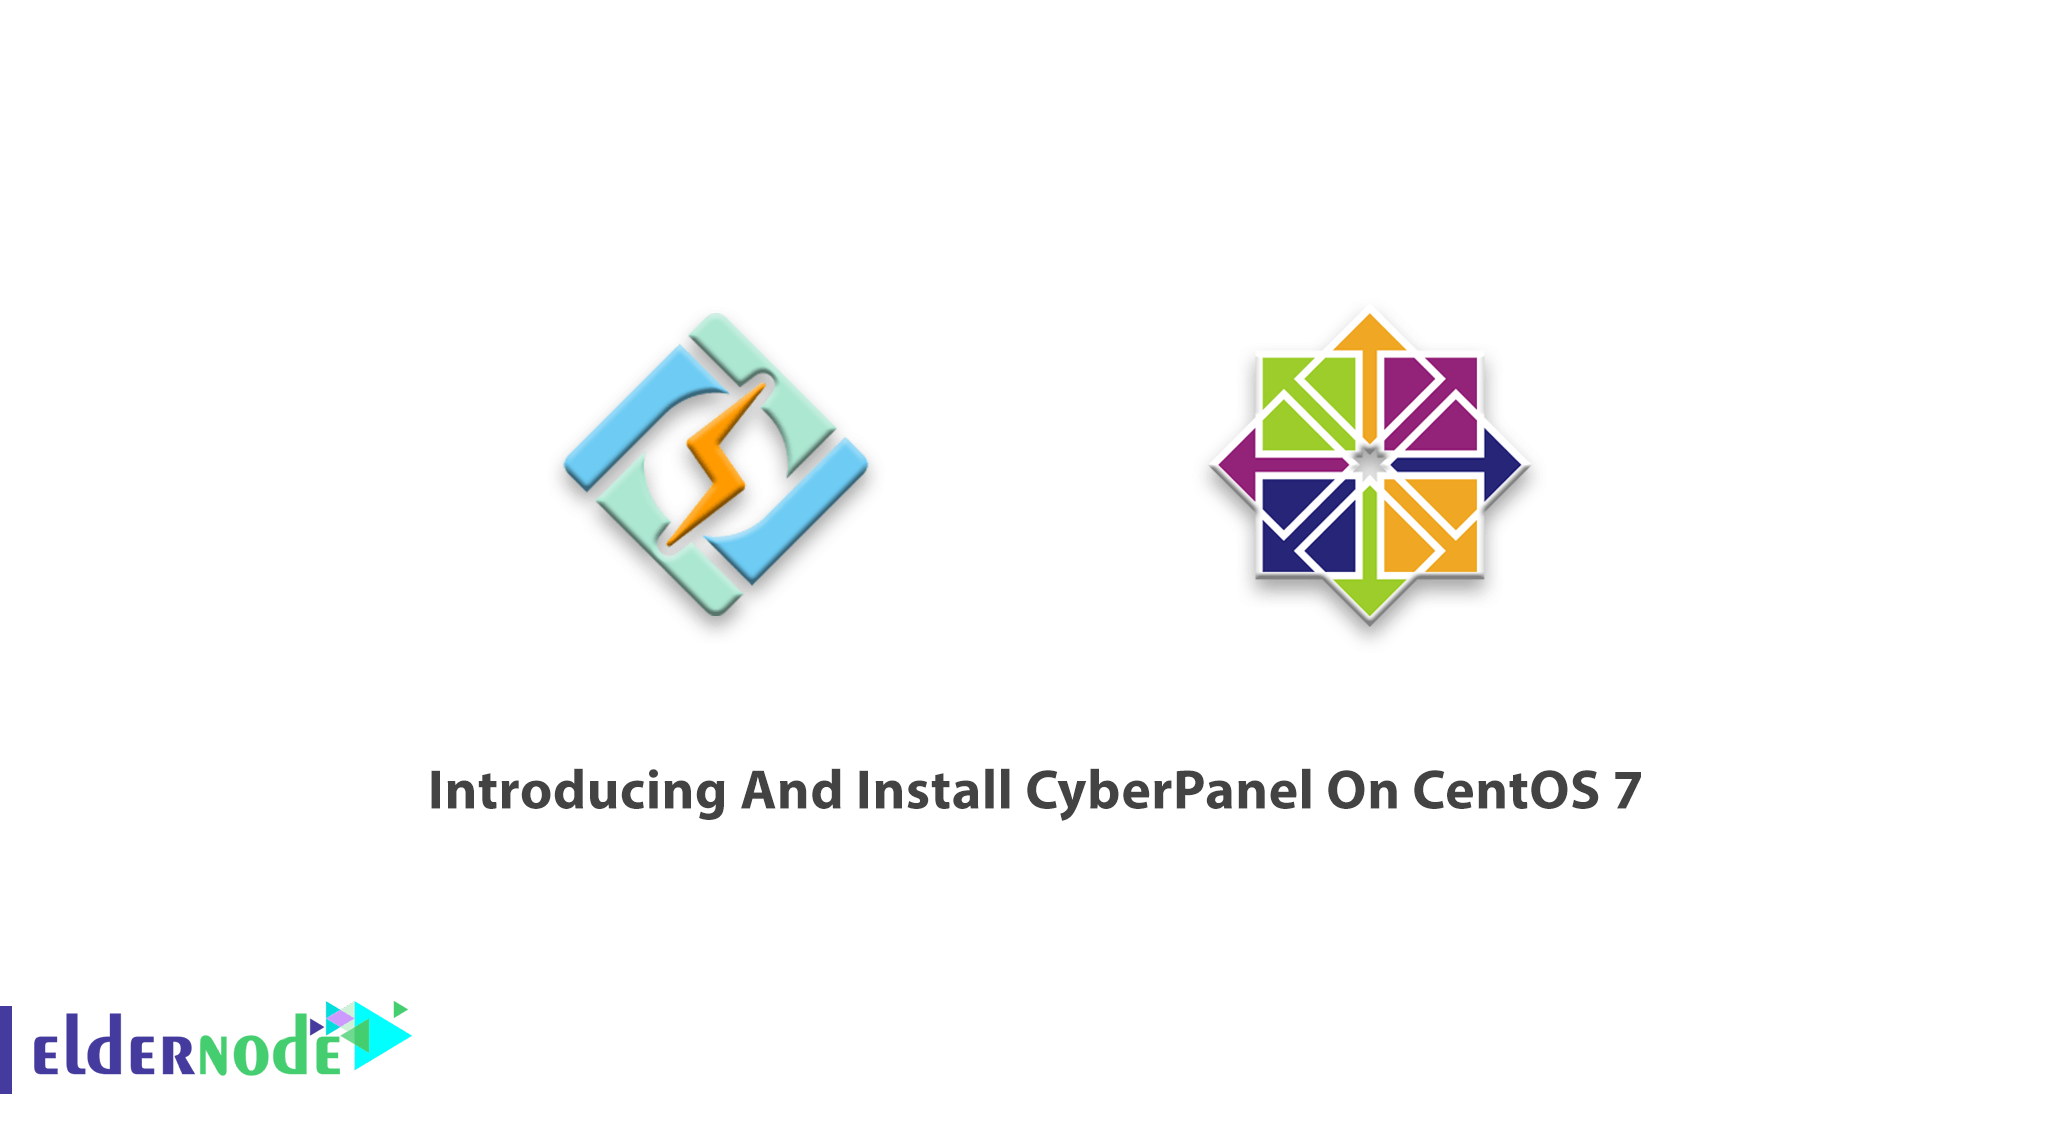 Introducing And Install CyberPanel On CentOS 7